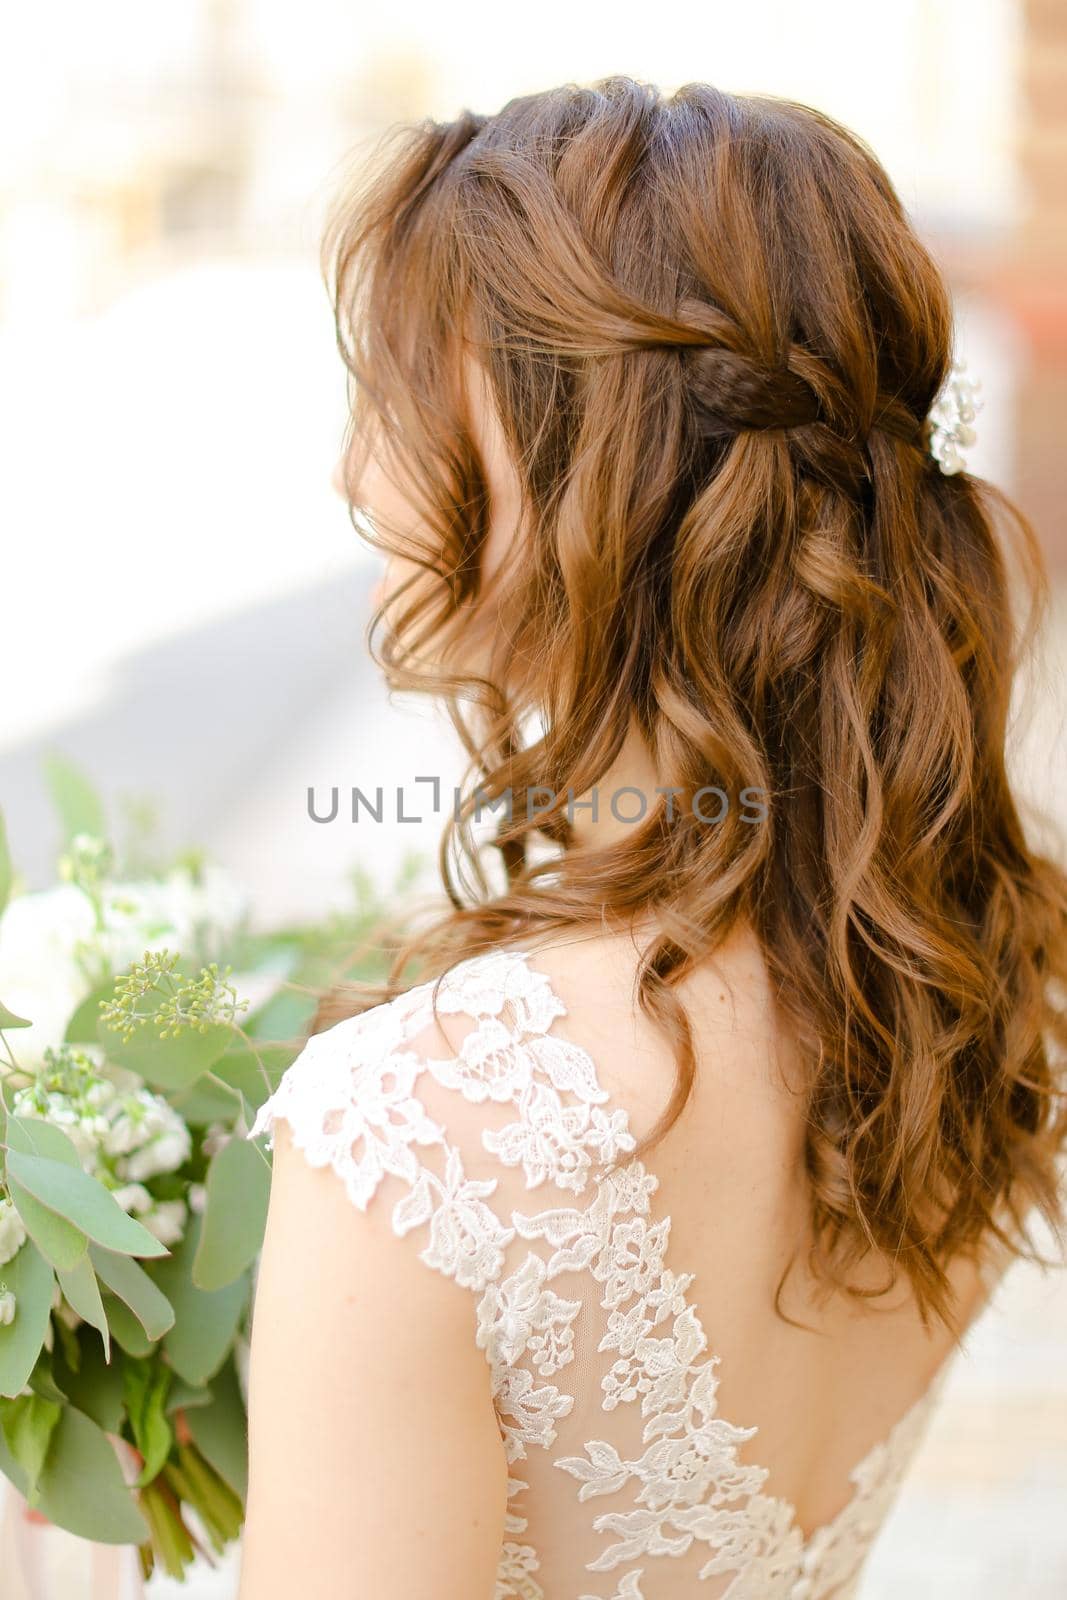 Back view of cute curls for bride keeping flowers. Concept of wedding photo session and stylish hair do.